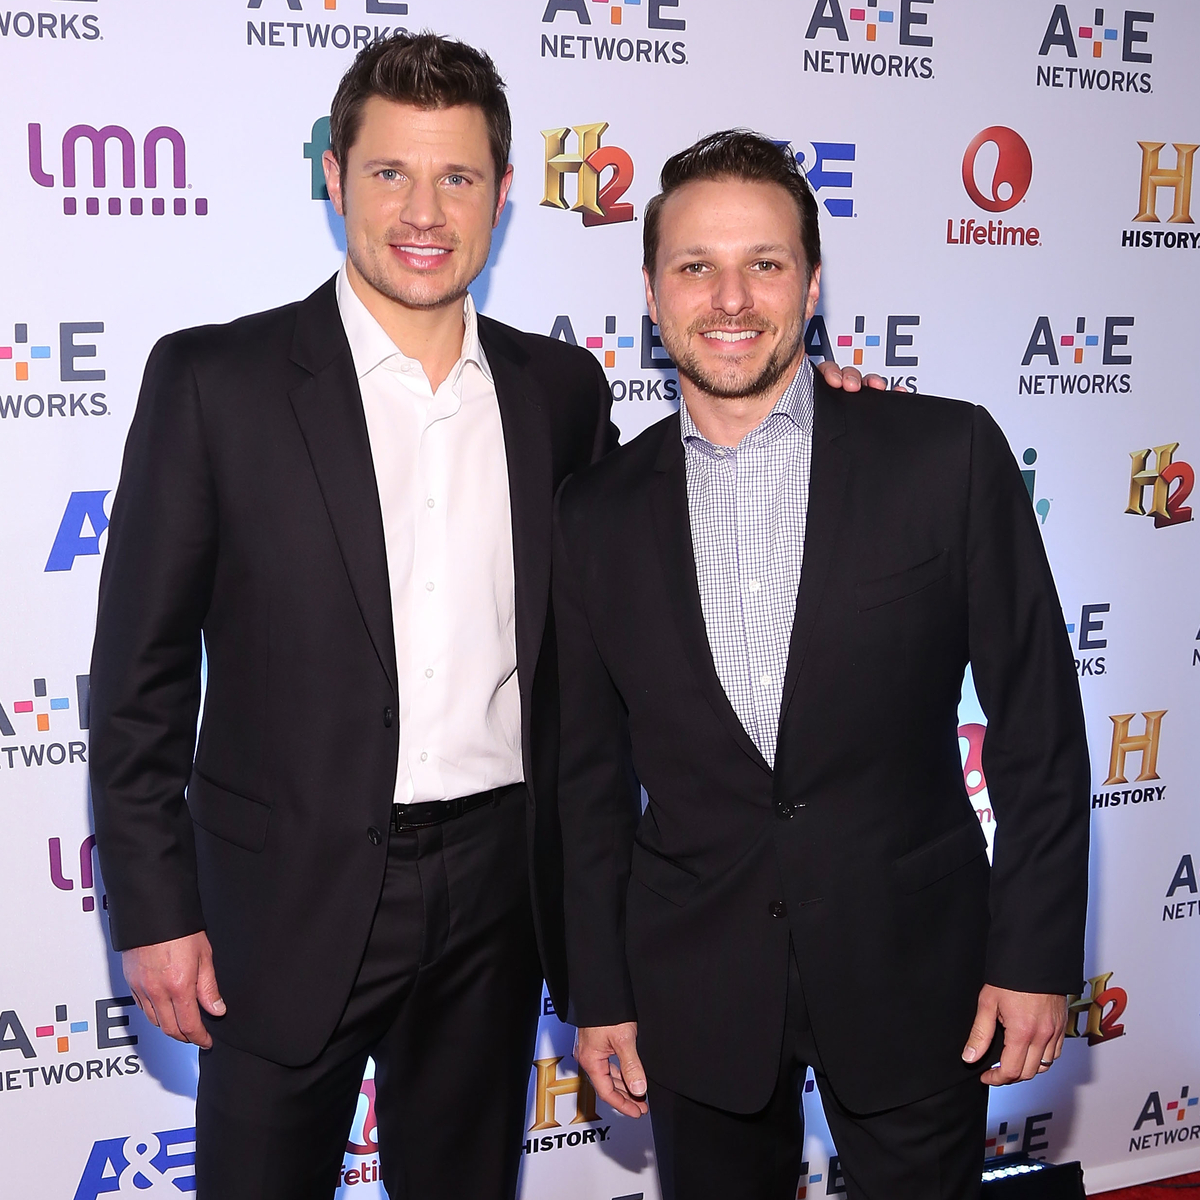 98 Degrees Is Back: Nick Lachey, Drew Lachey, Justin Jeffre and Jeff  Timmons Reunite for One Show!